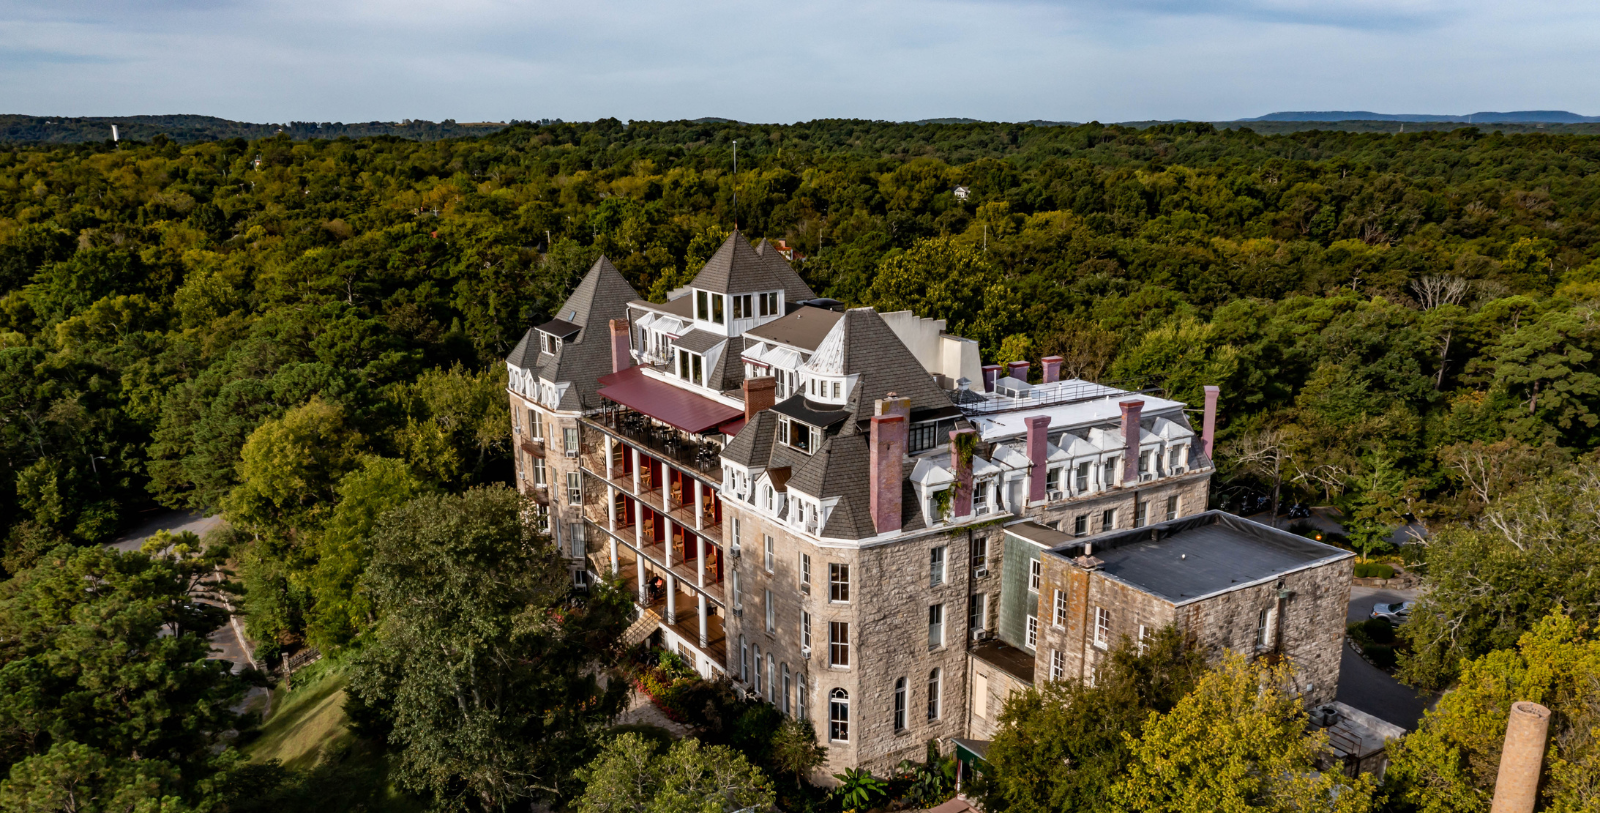 Image of Hotel Exterior 1886 Crescent Hotel & Spa, Member of Historic Hotels of America, in Eureka Springs, Arkansas, Overview